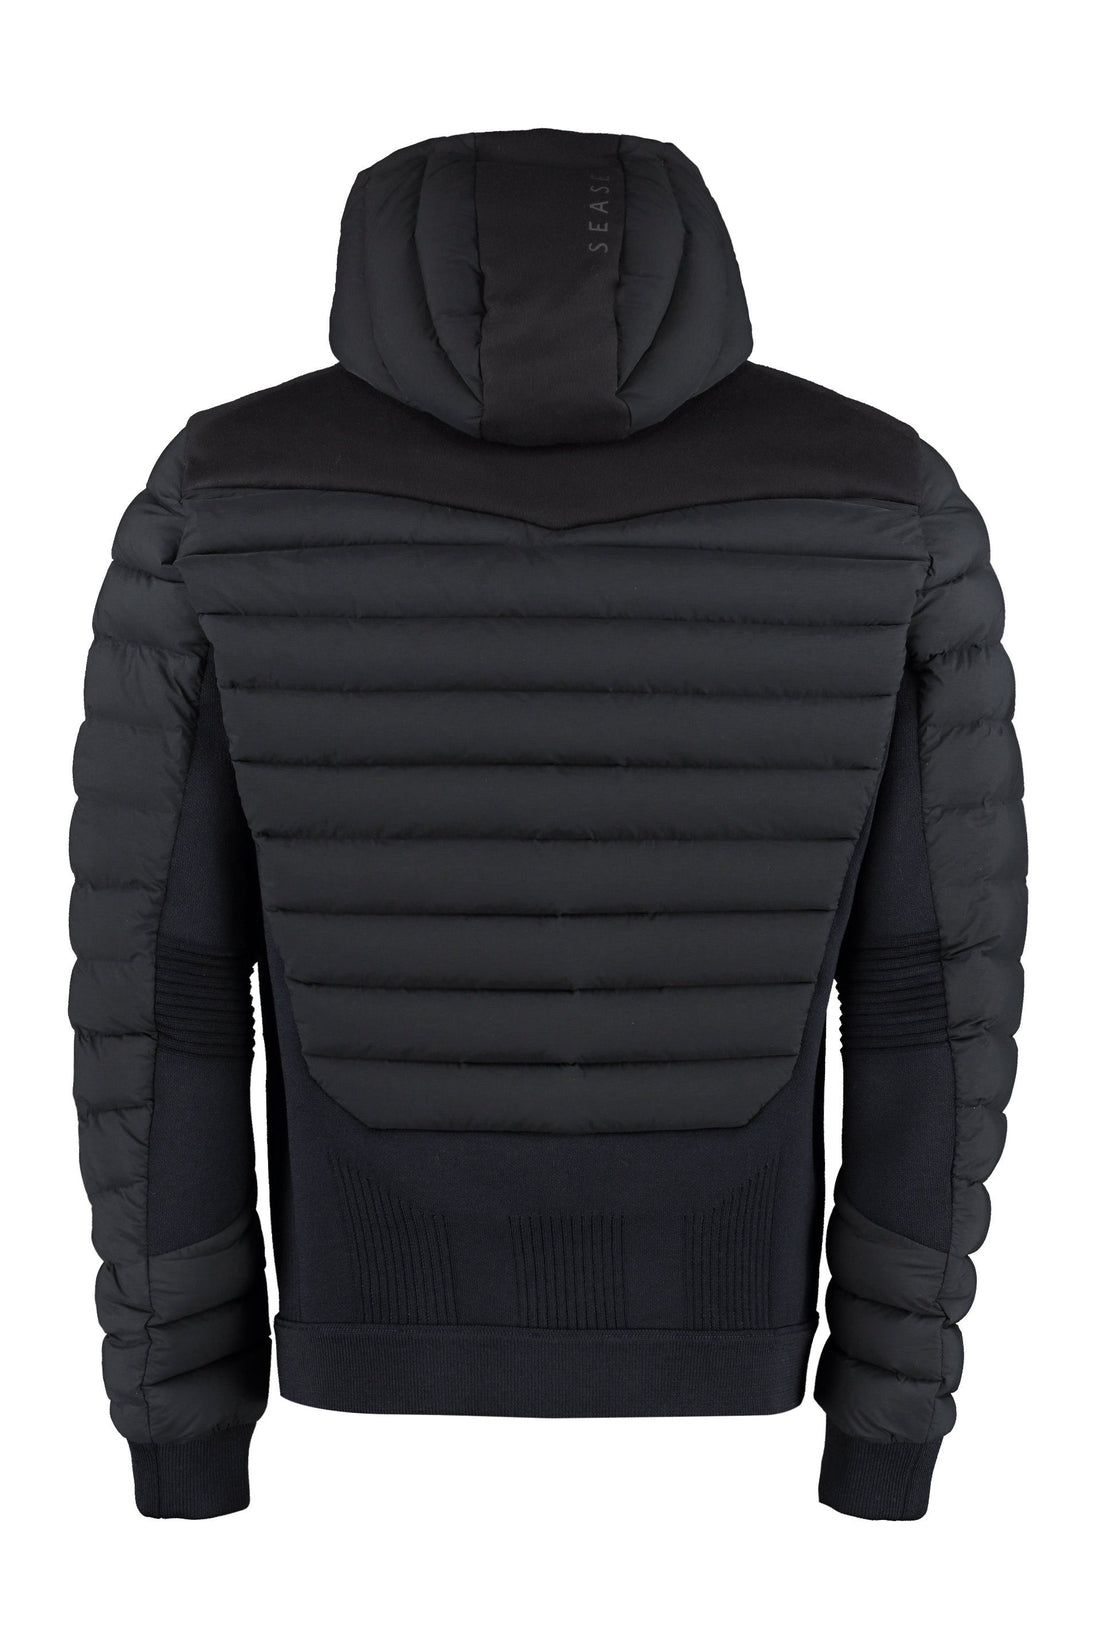 Sease-OUTLET-SALE-Hooded down jacket-ARCHIVIST